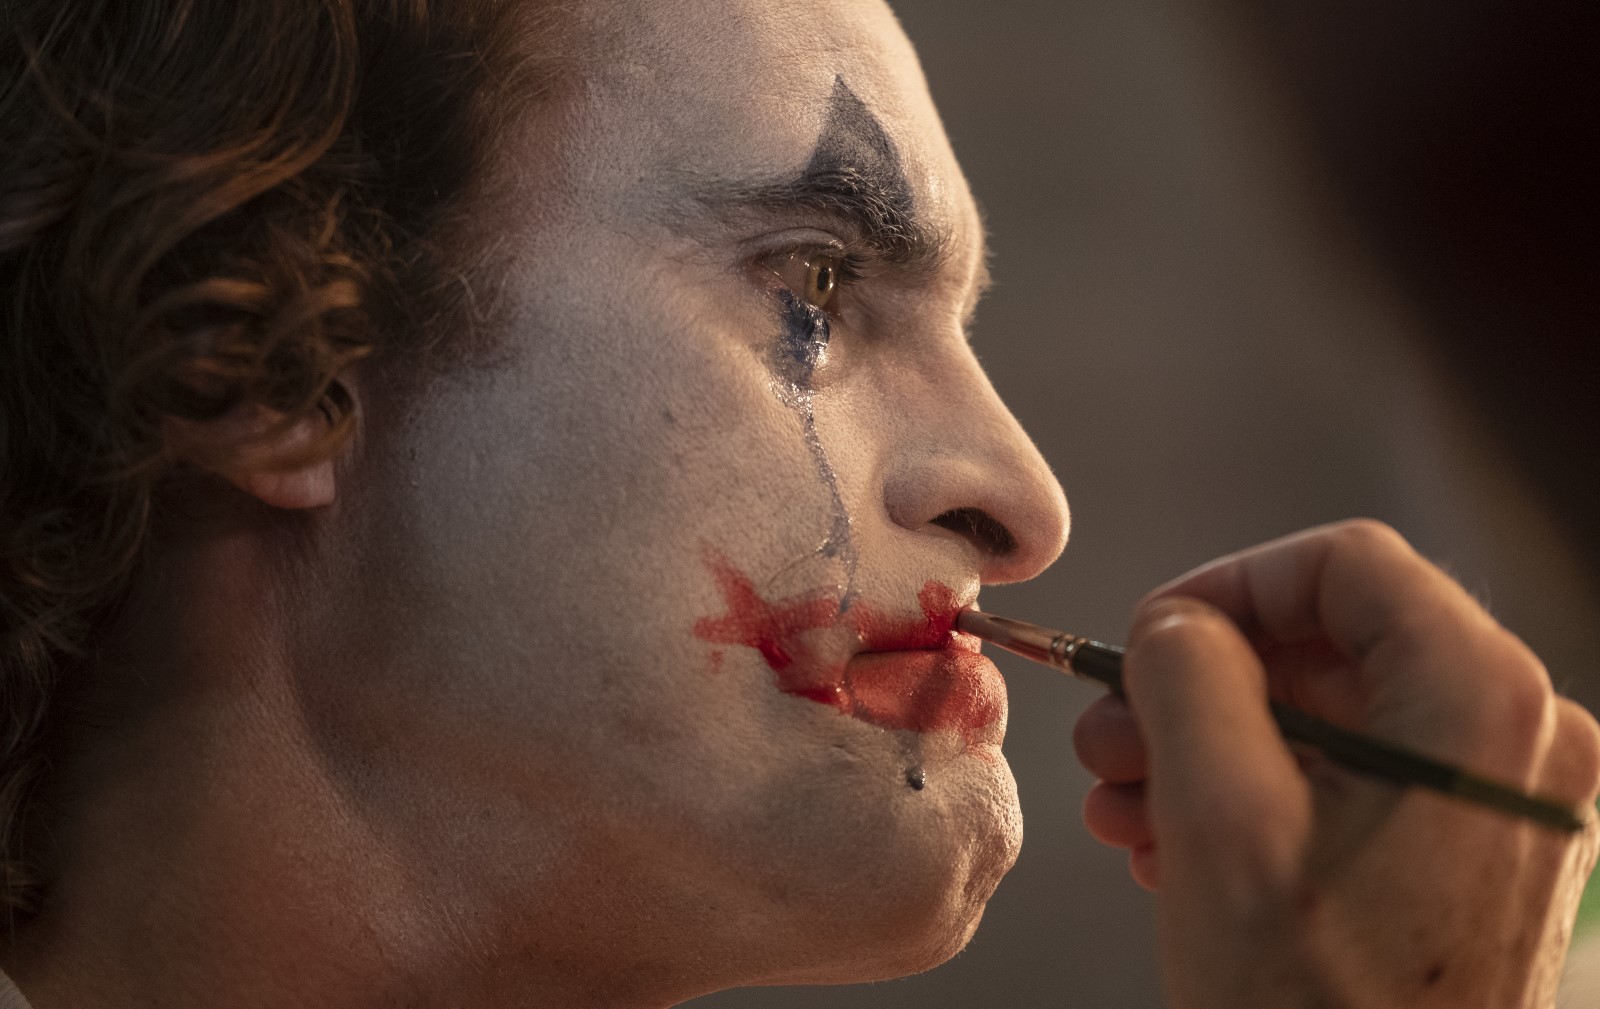 A film still showing Arthur putting his makeup on while crying